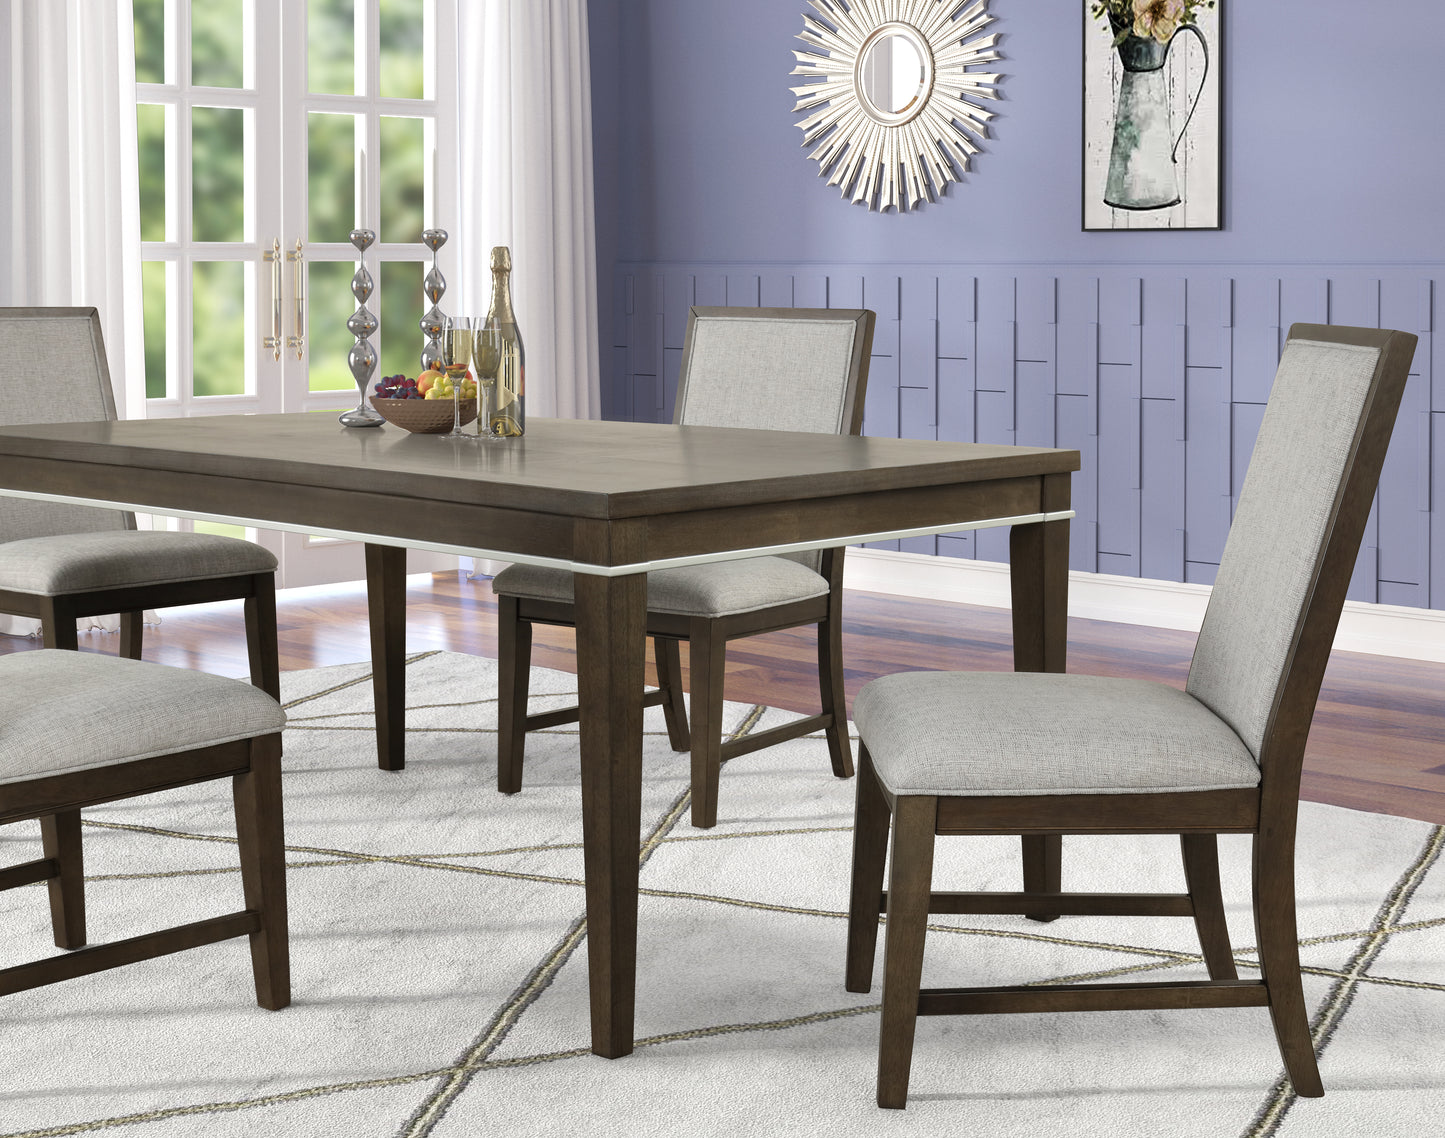 Roundhill Furniture Aberll Wood Dining Room Set, Table with 4 Side Chairs, Gray